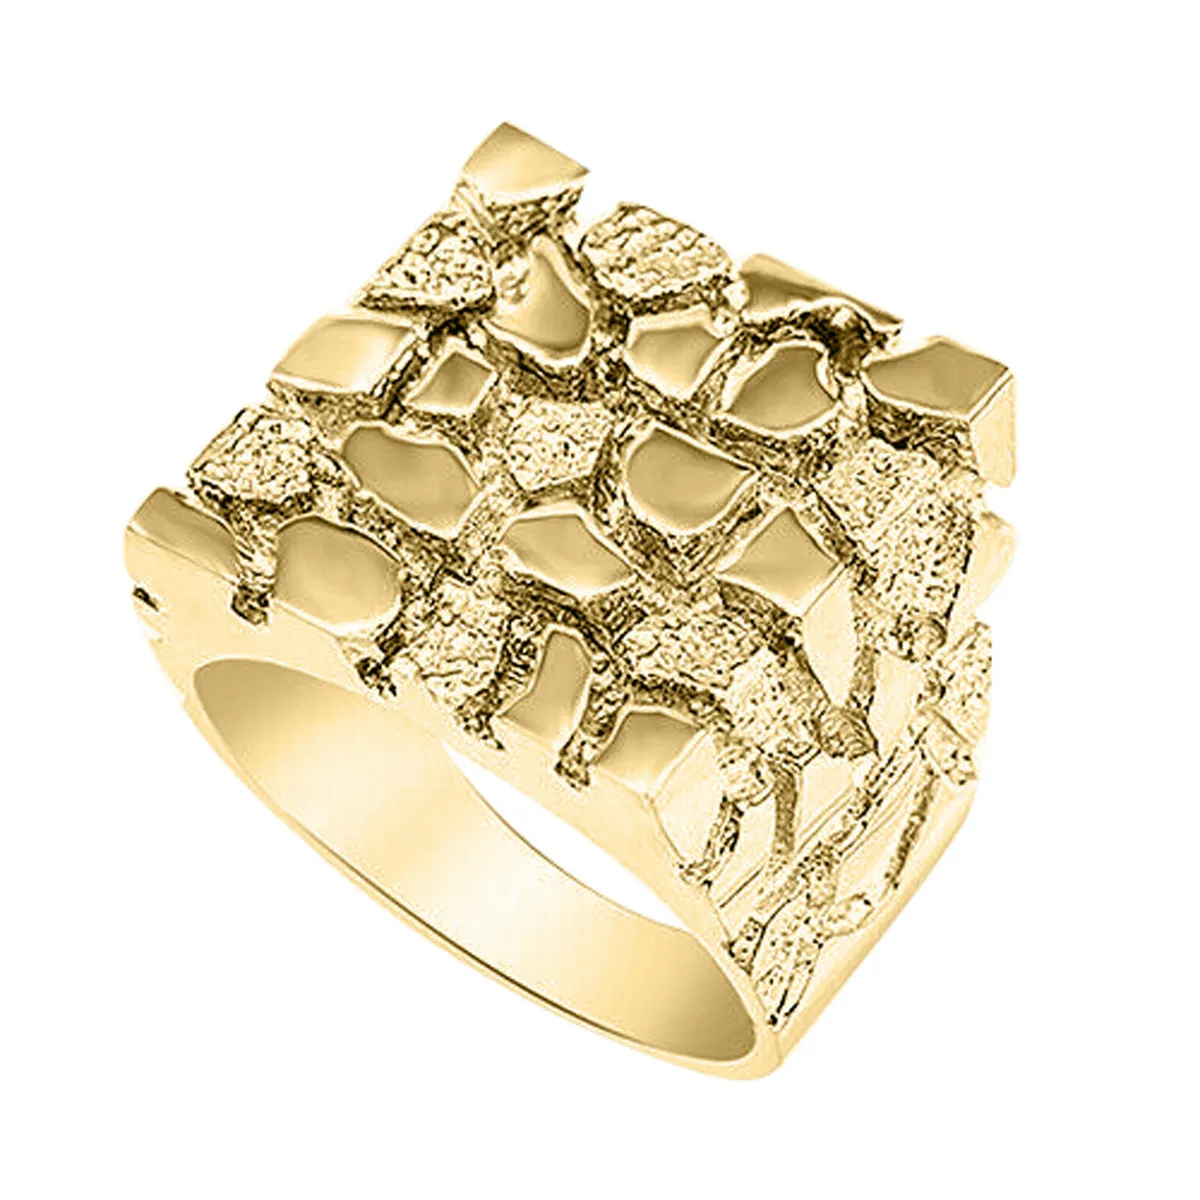 Discover Timeless Elegance:Gold Nugget Rings for Every Style